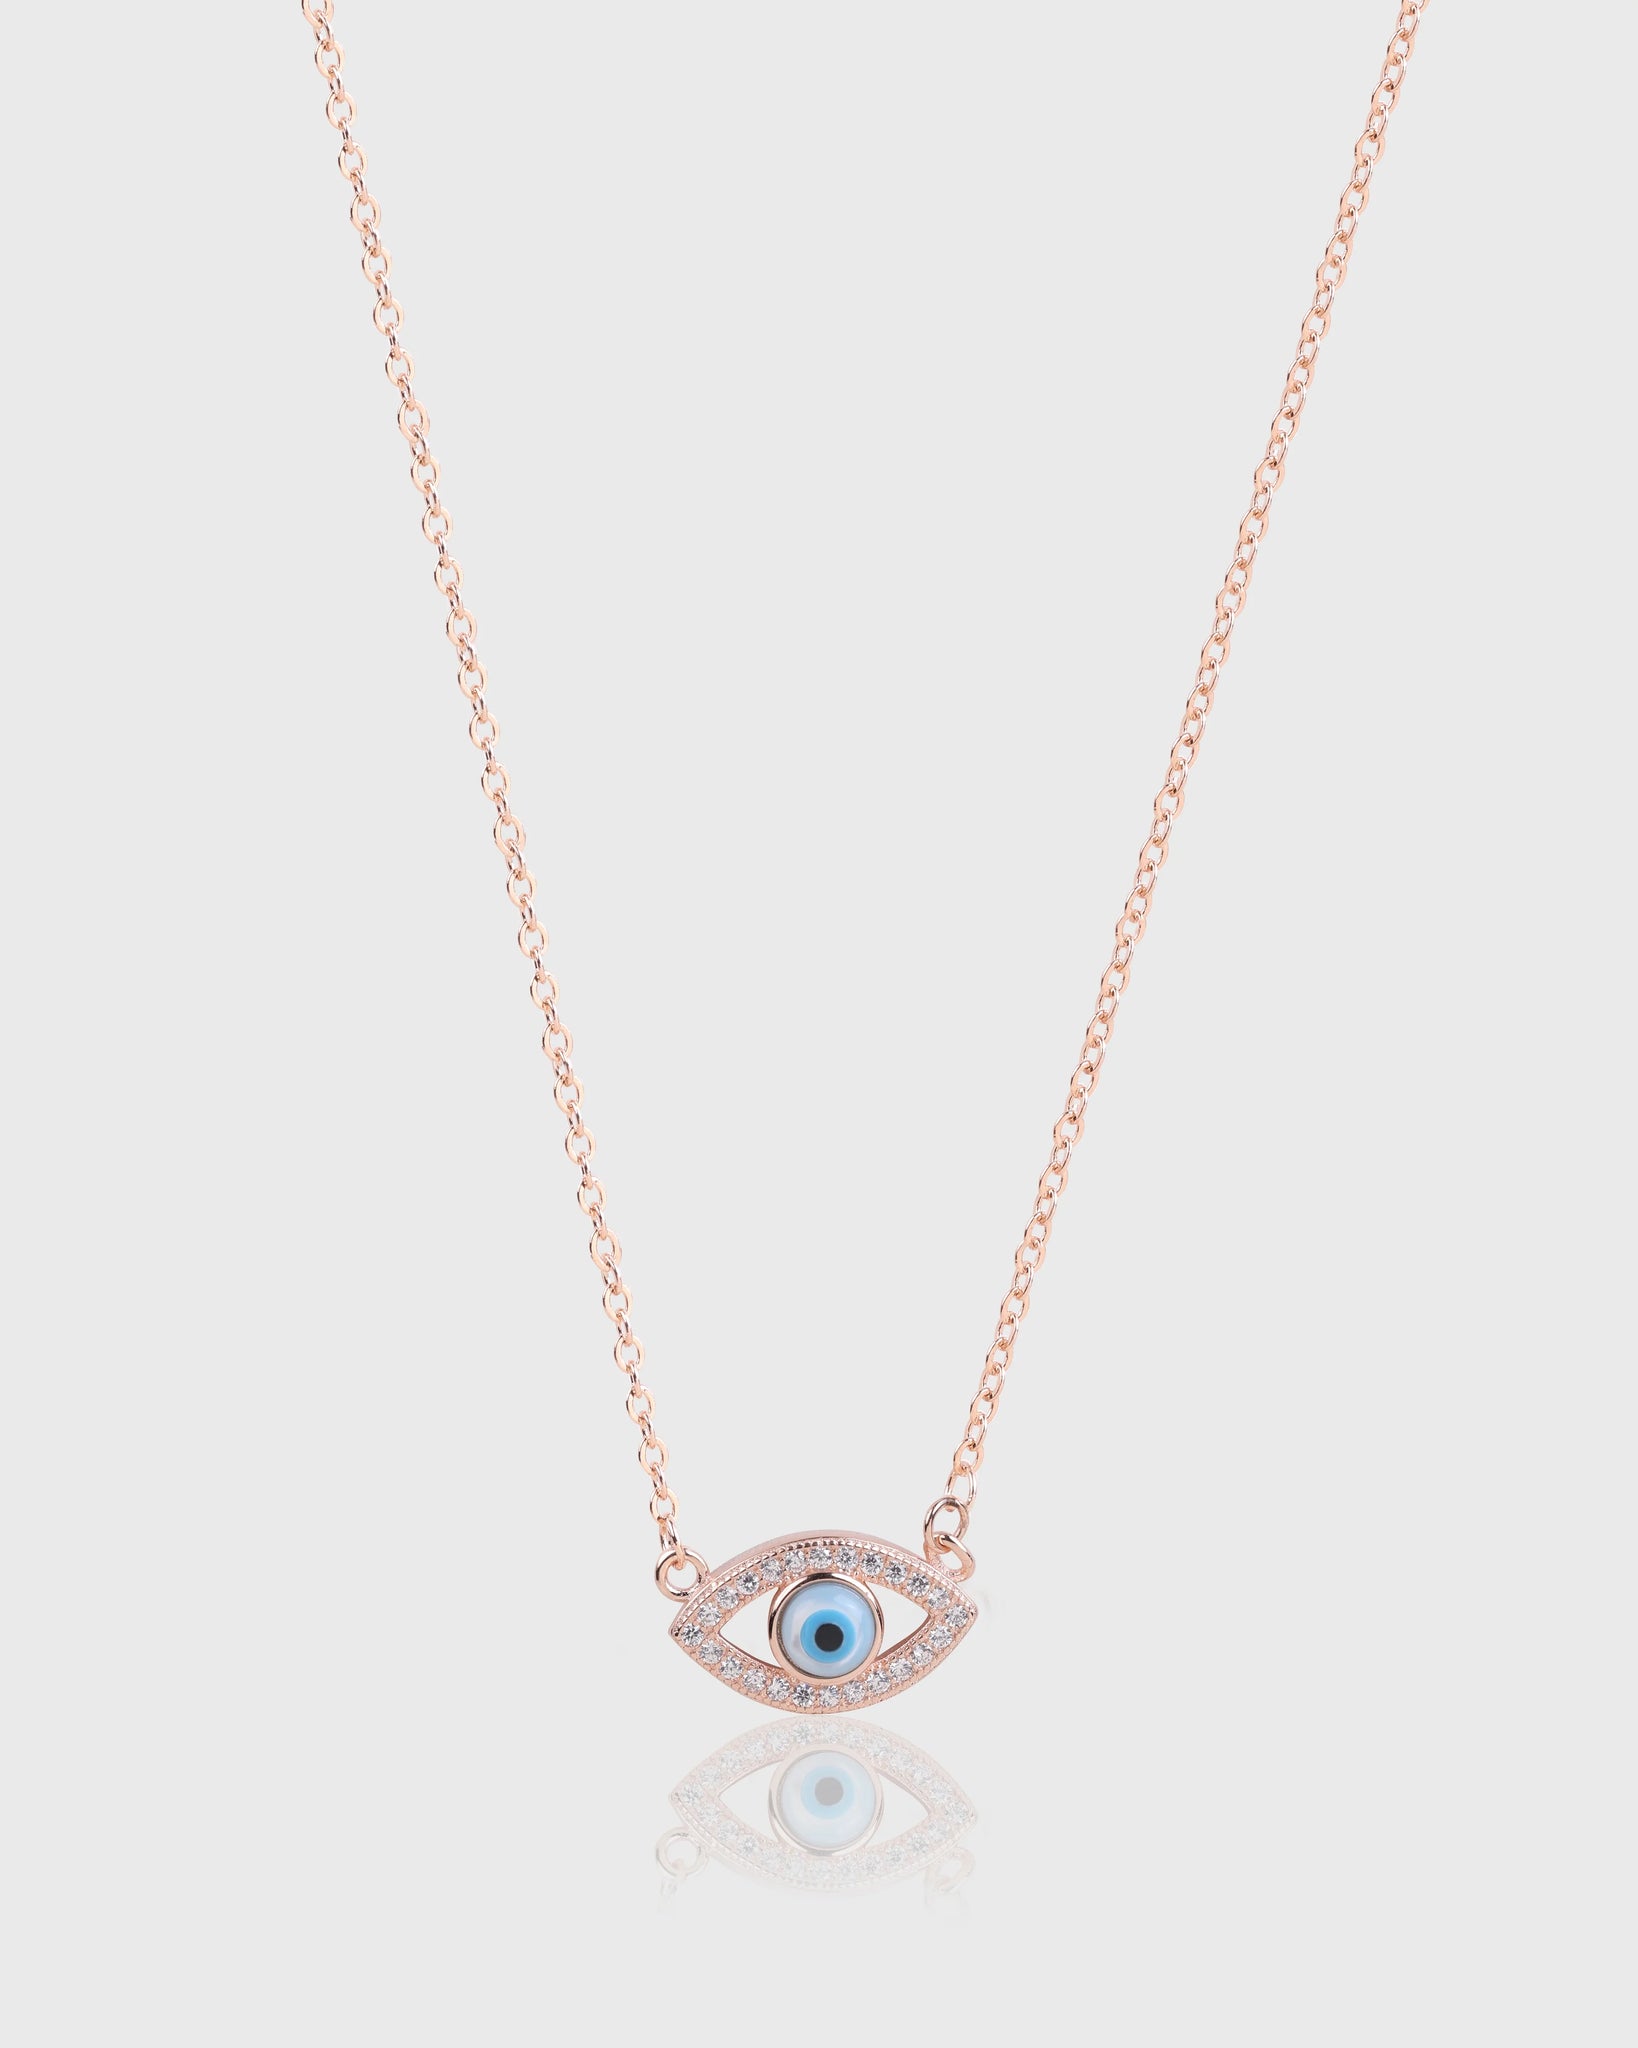 Glendy Desirable Luck Evil Eye Silver Chain With Pendant